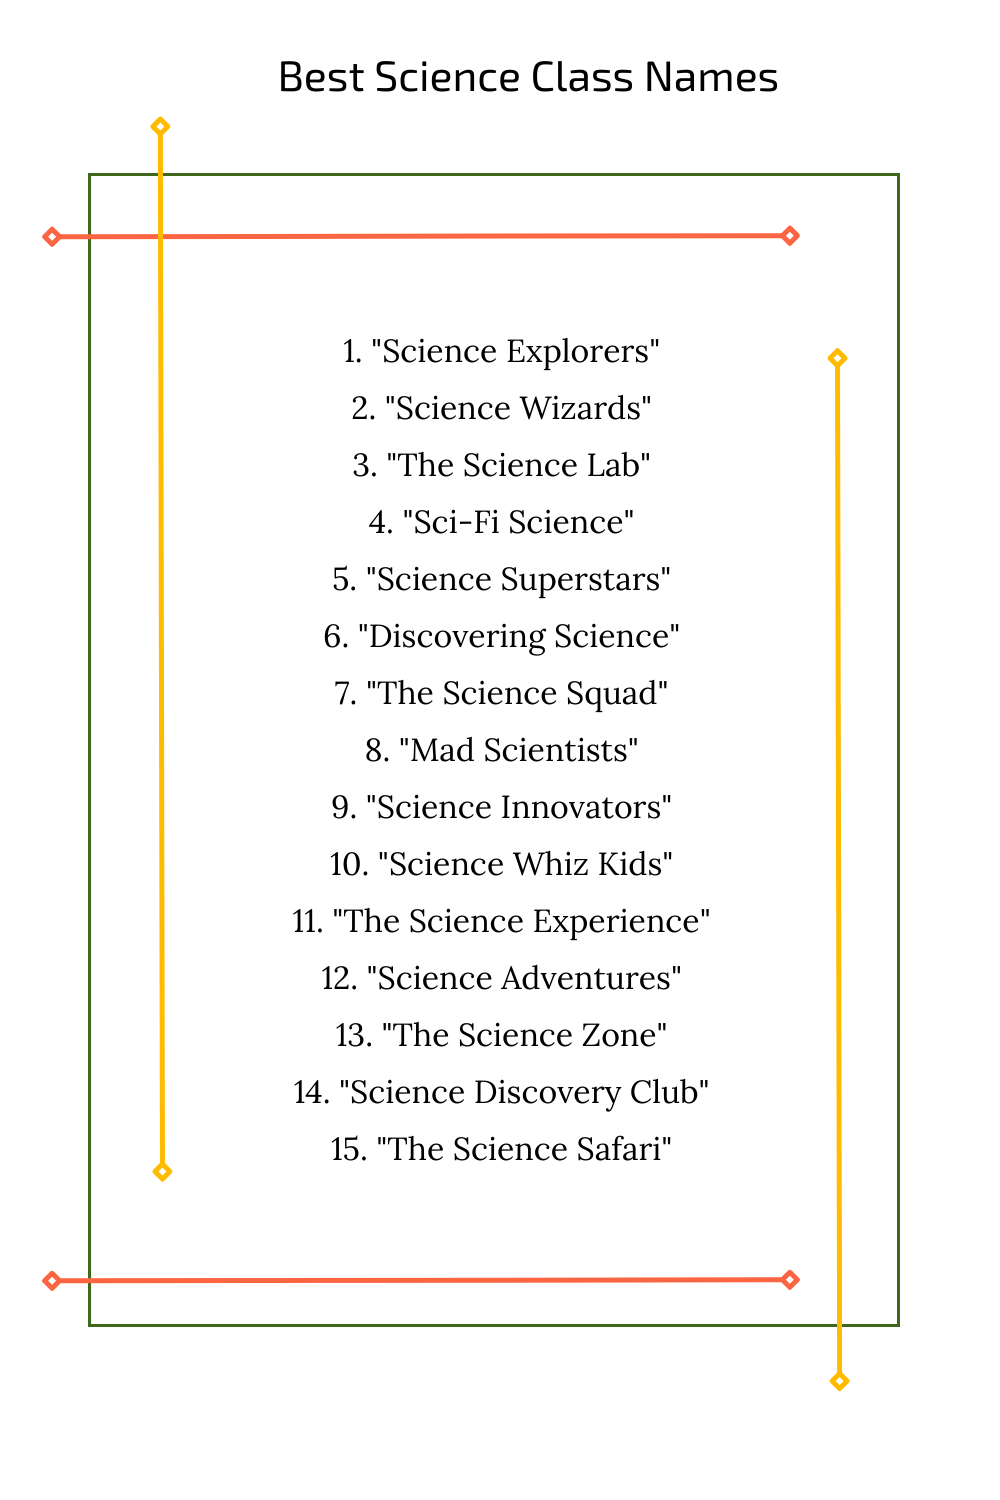 Best Science Class Names